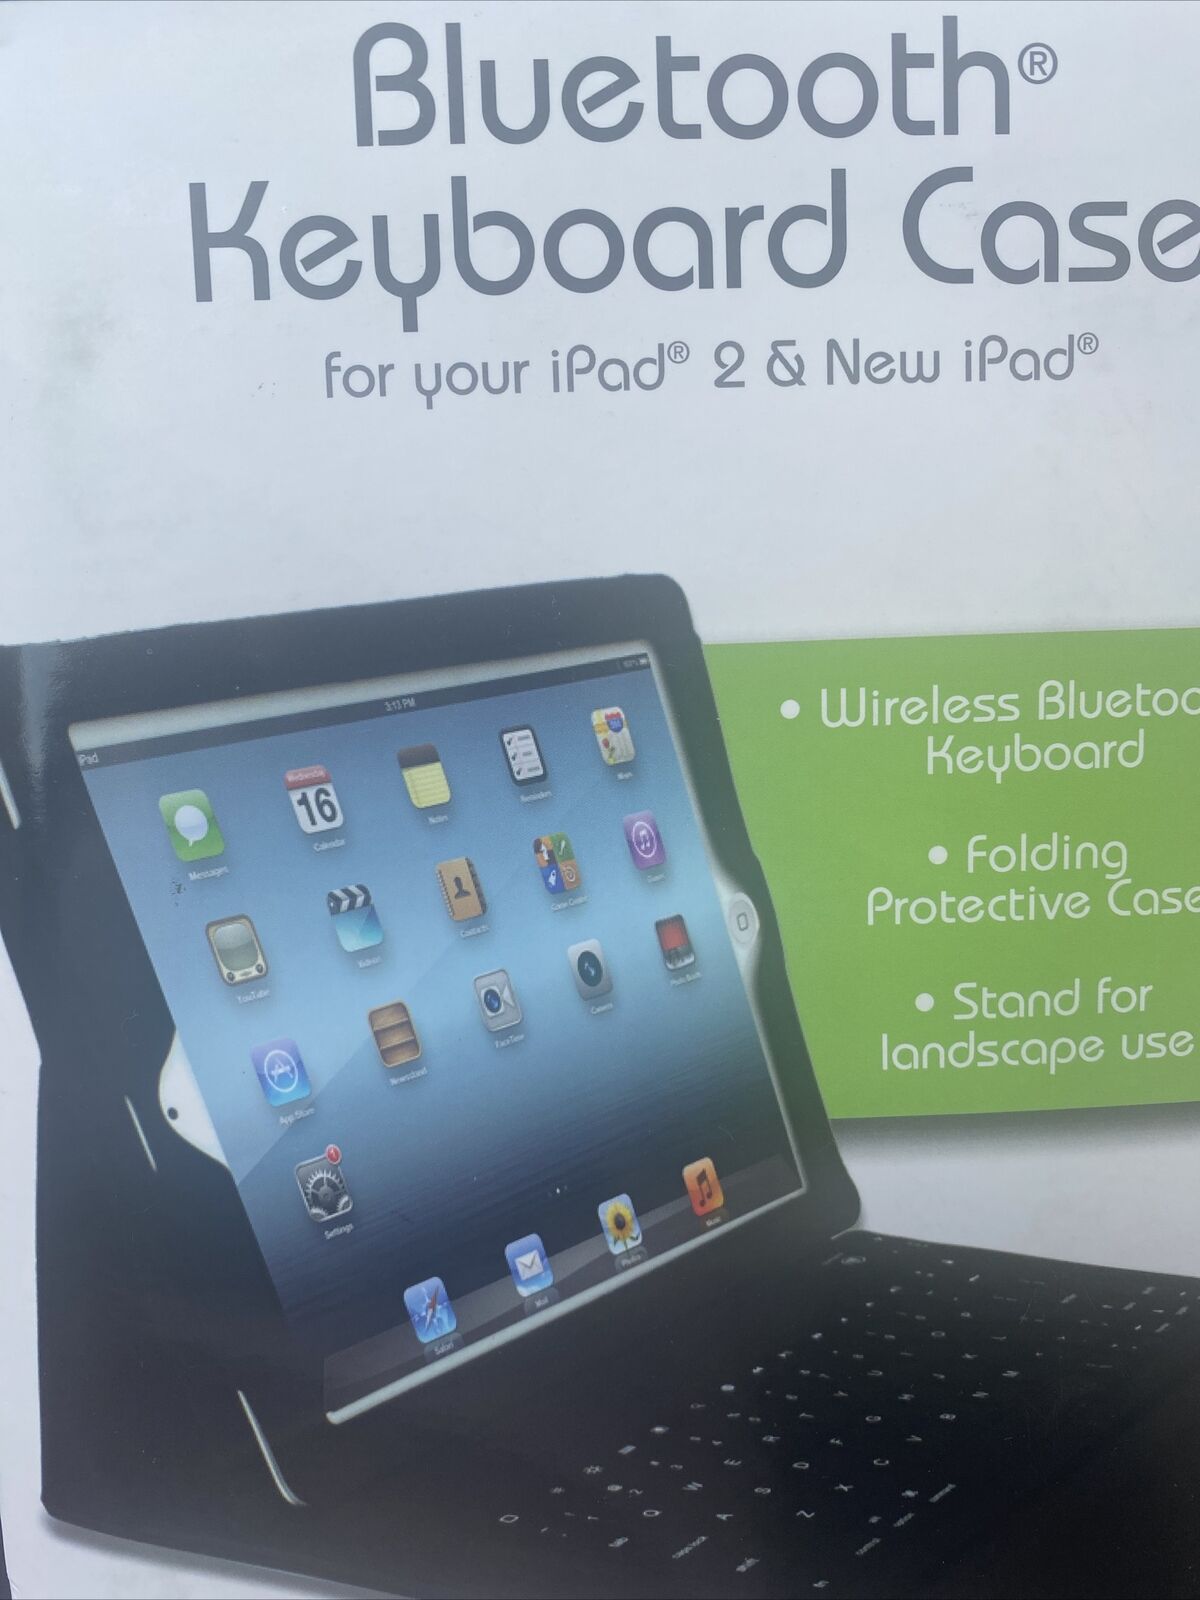 3 in 1 Bluetooth Keyboard In Notebook Style Case For Your iPad 2 & New iPad